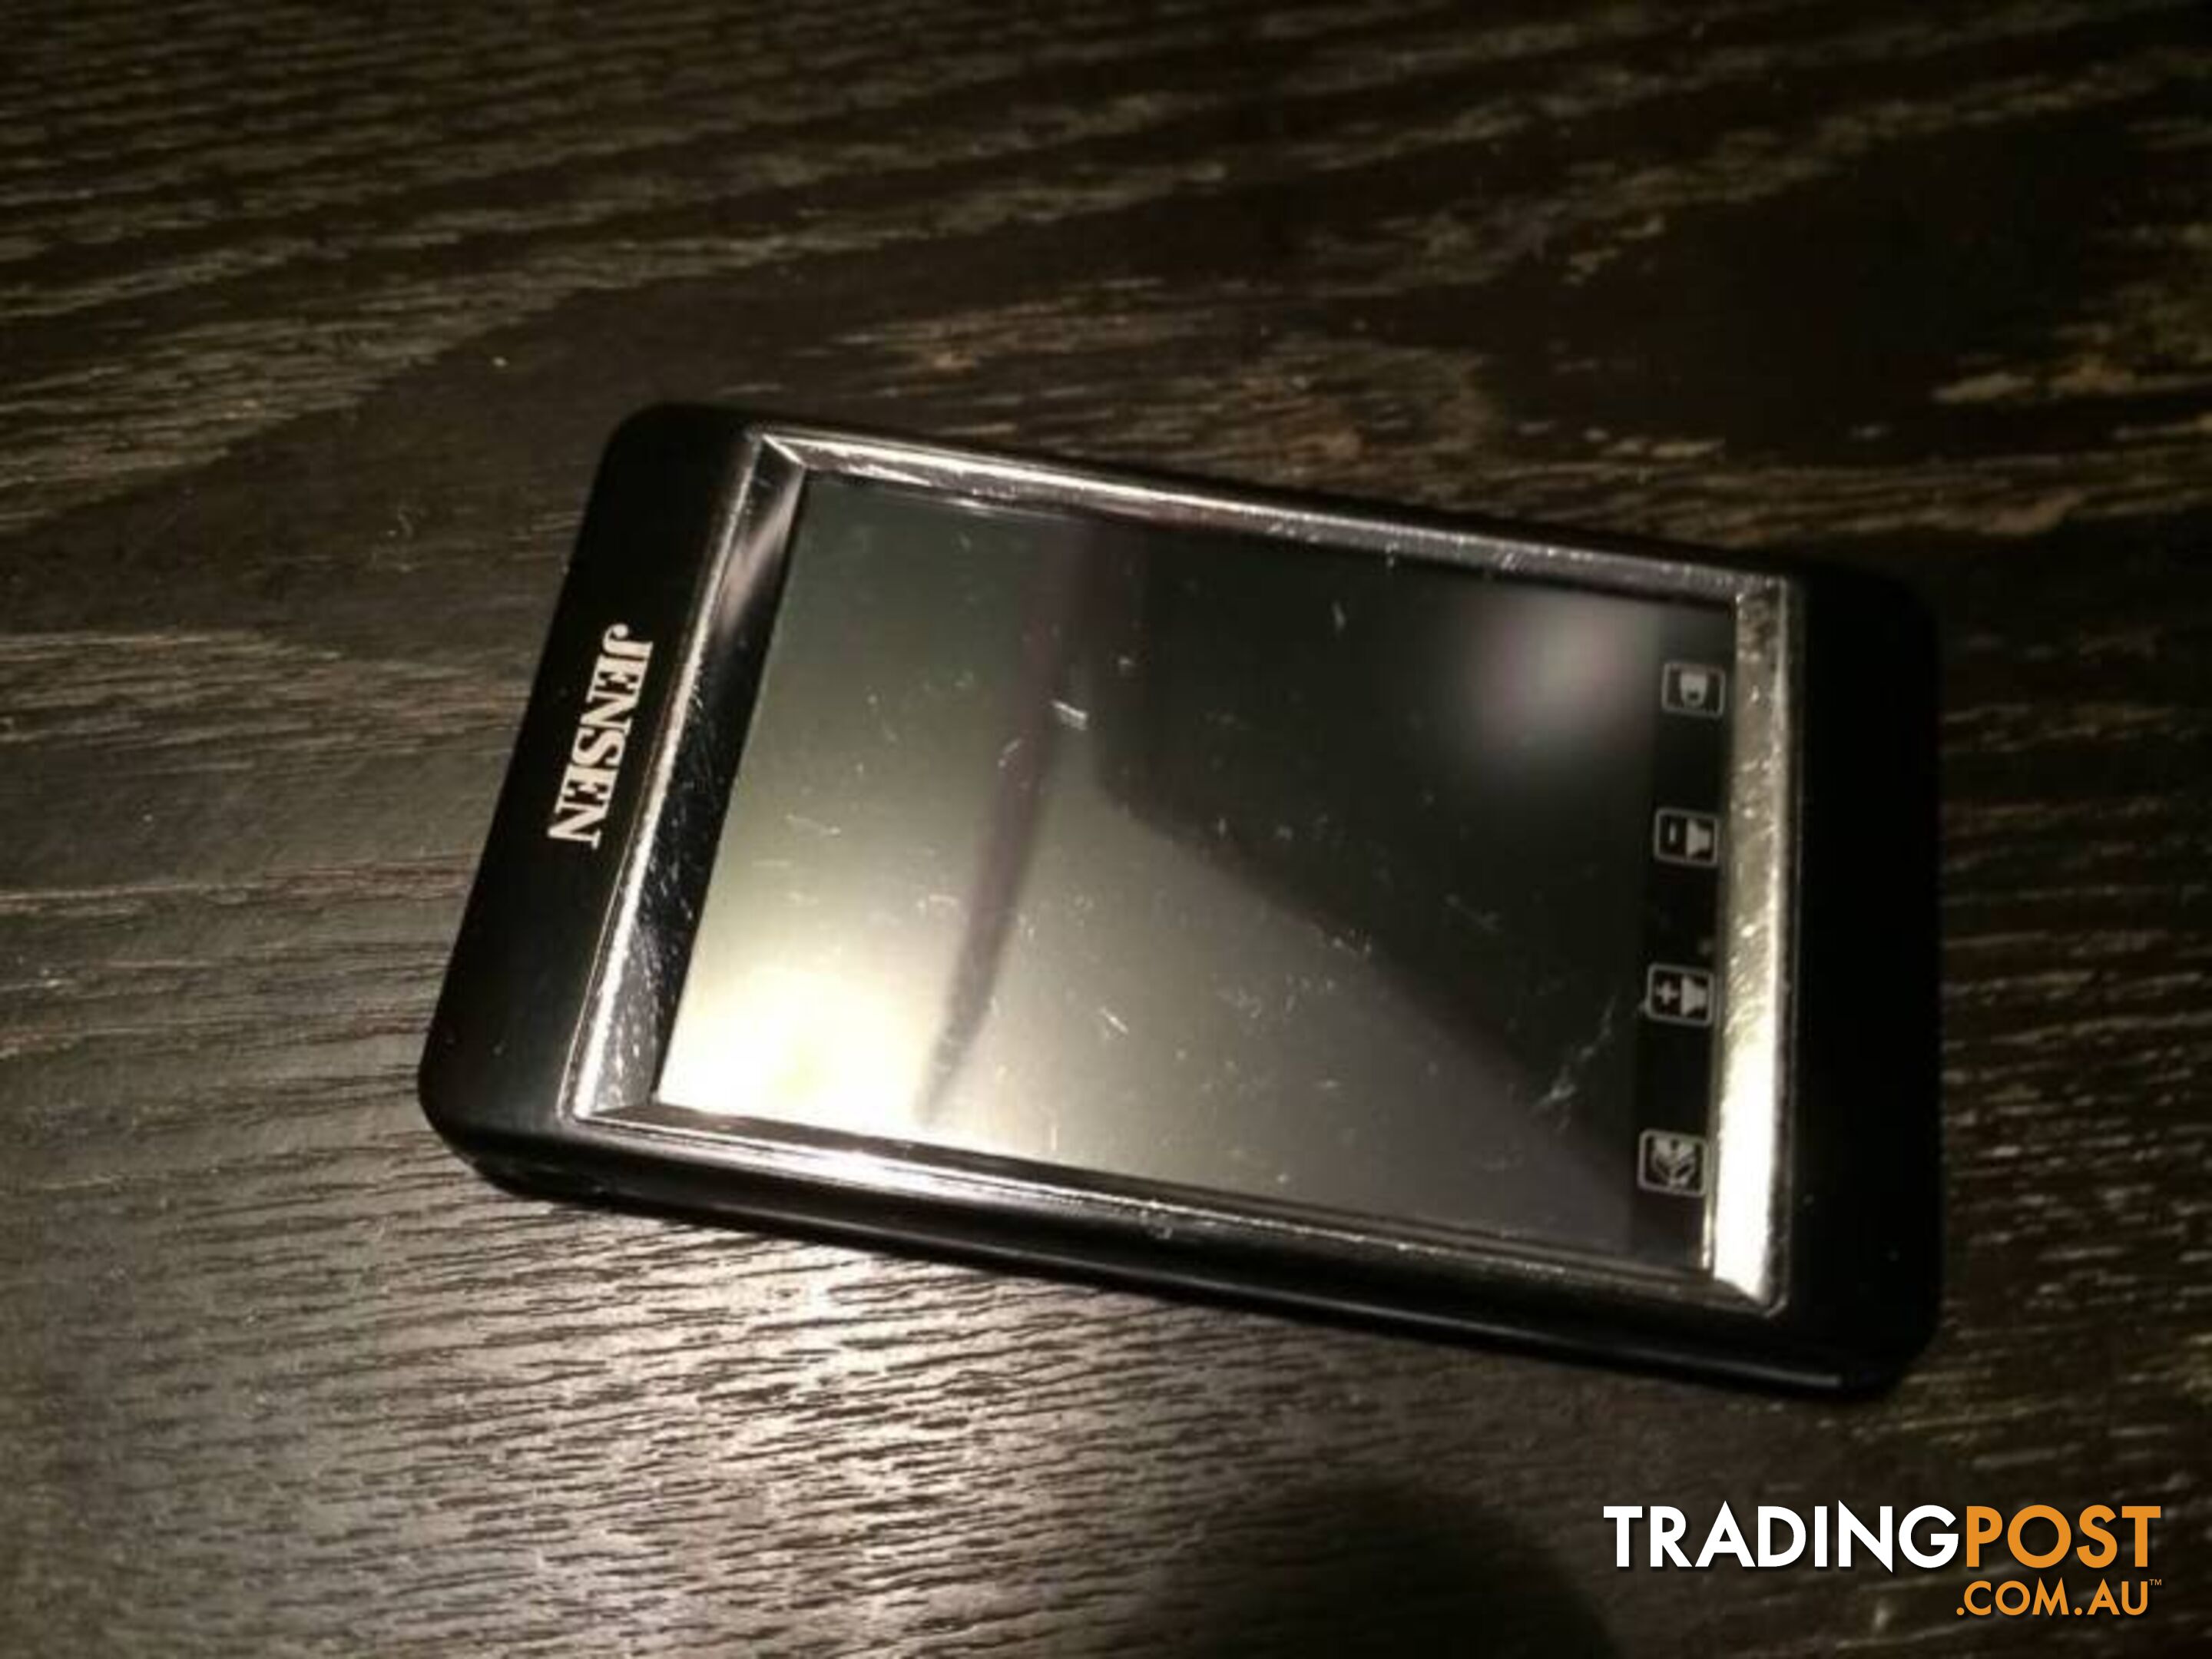 JENSEN 8GB MP3 PLAYER IN WORKING CONDITION